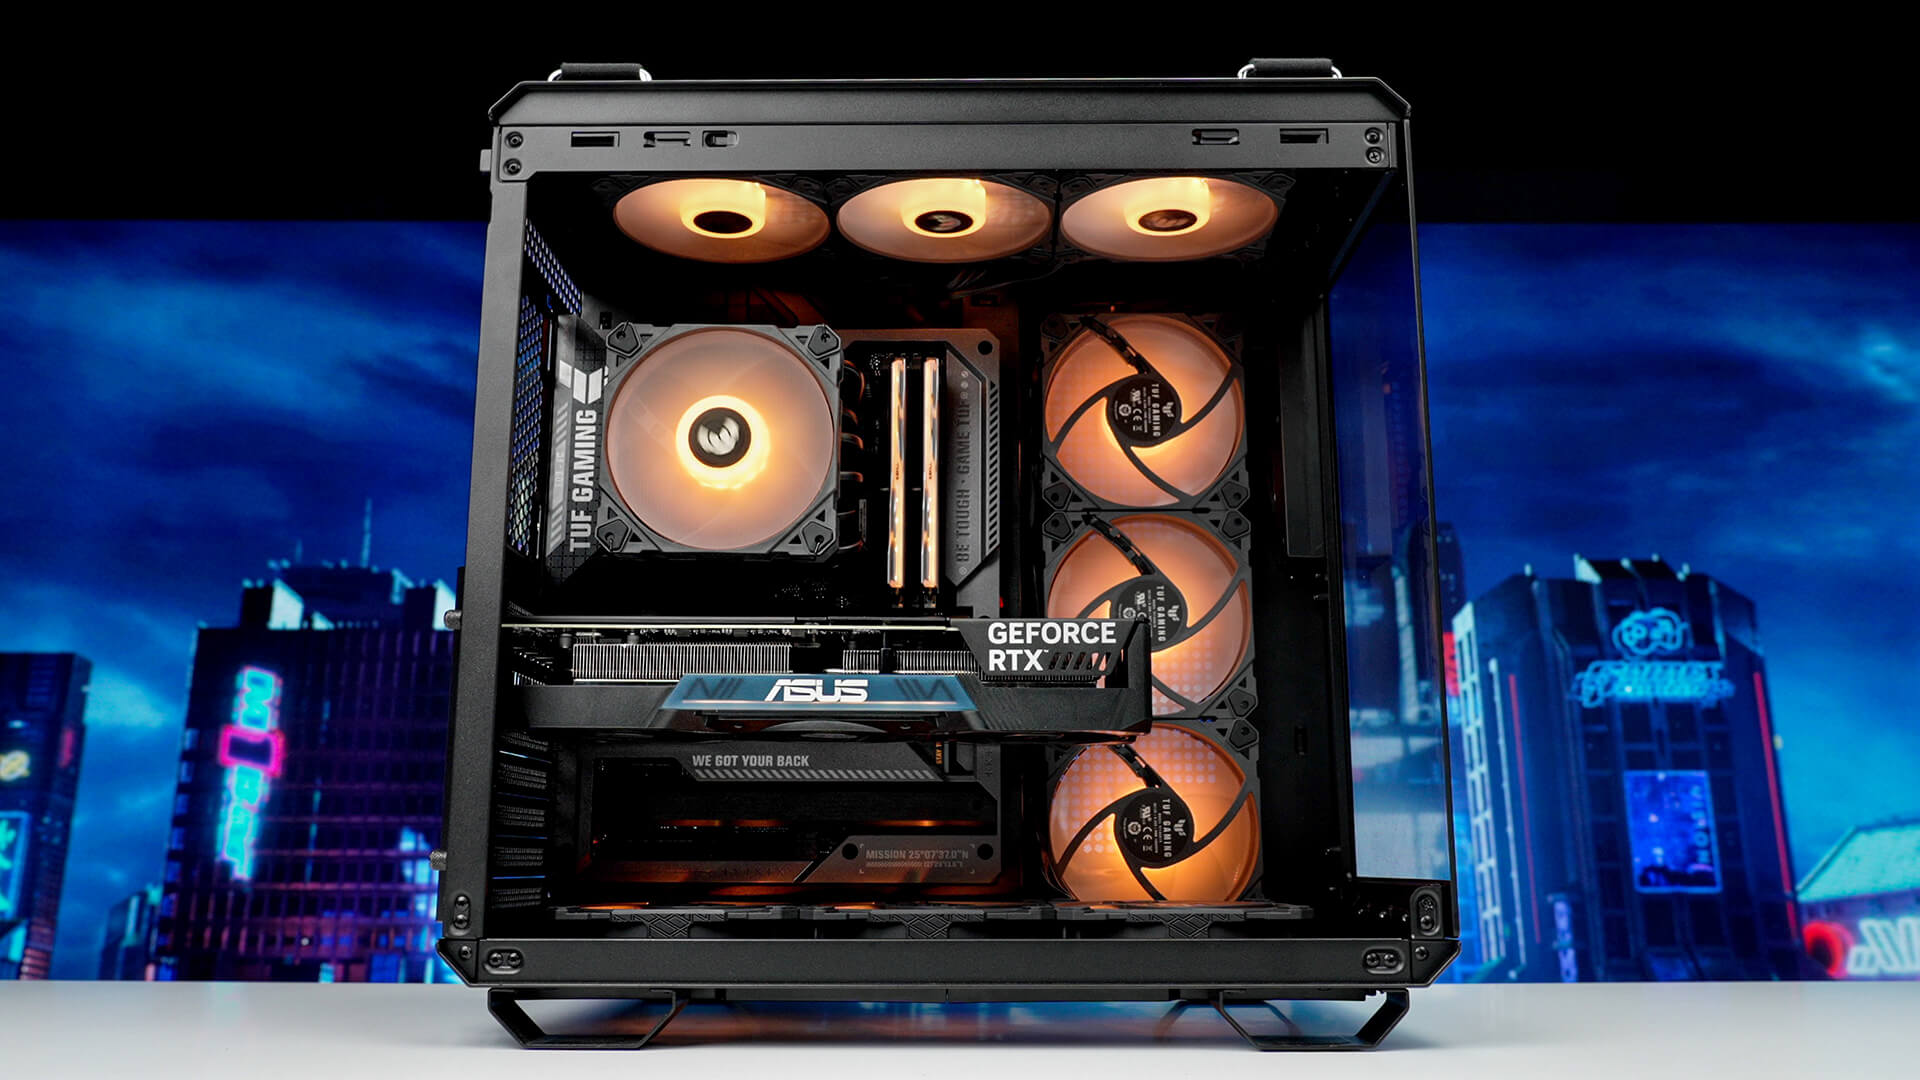 A full screen advanced BTF PC build with orange lighting shows clean and cable-free PC build.